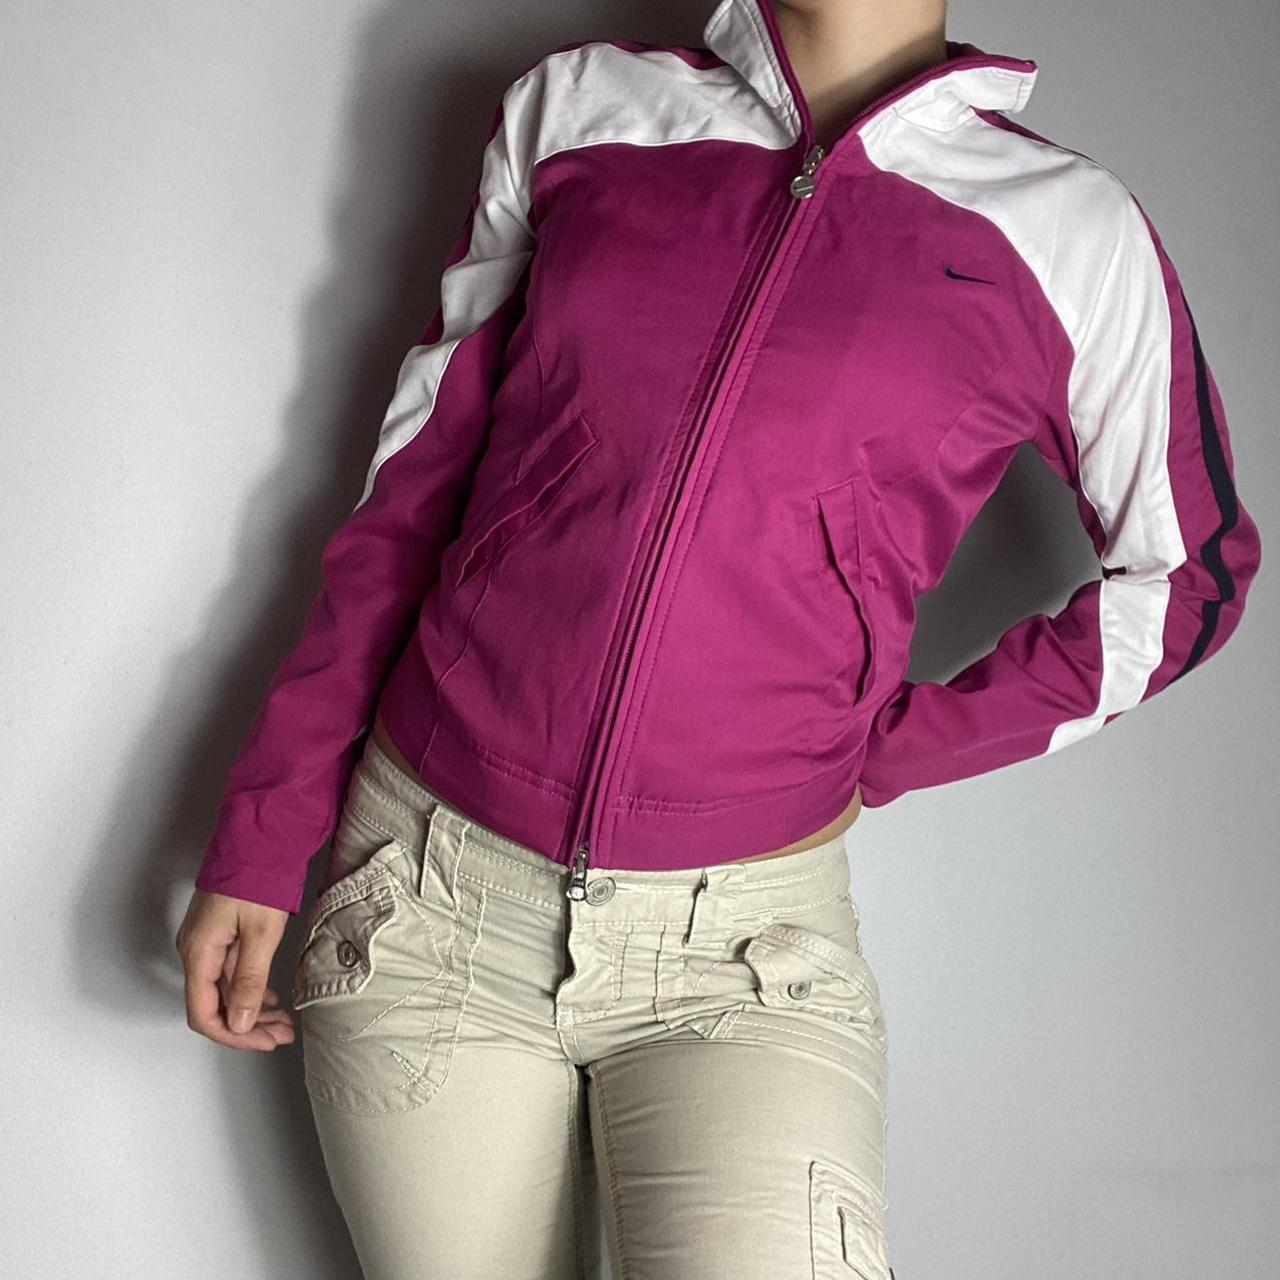 Nike Women's Pink and White Jacket (2)